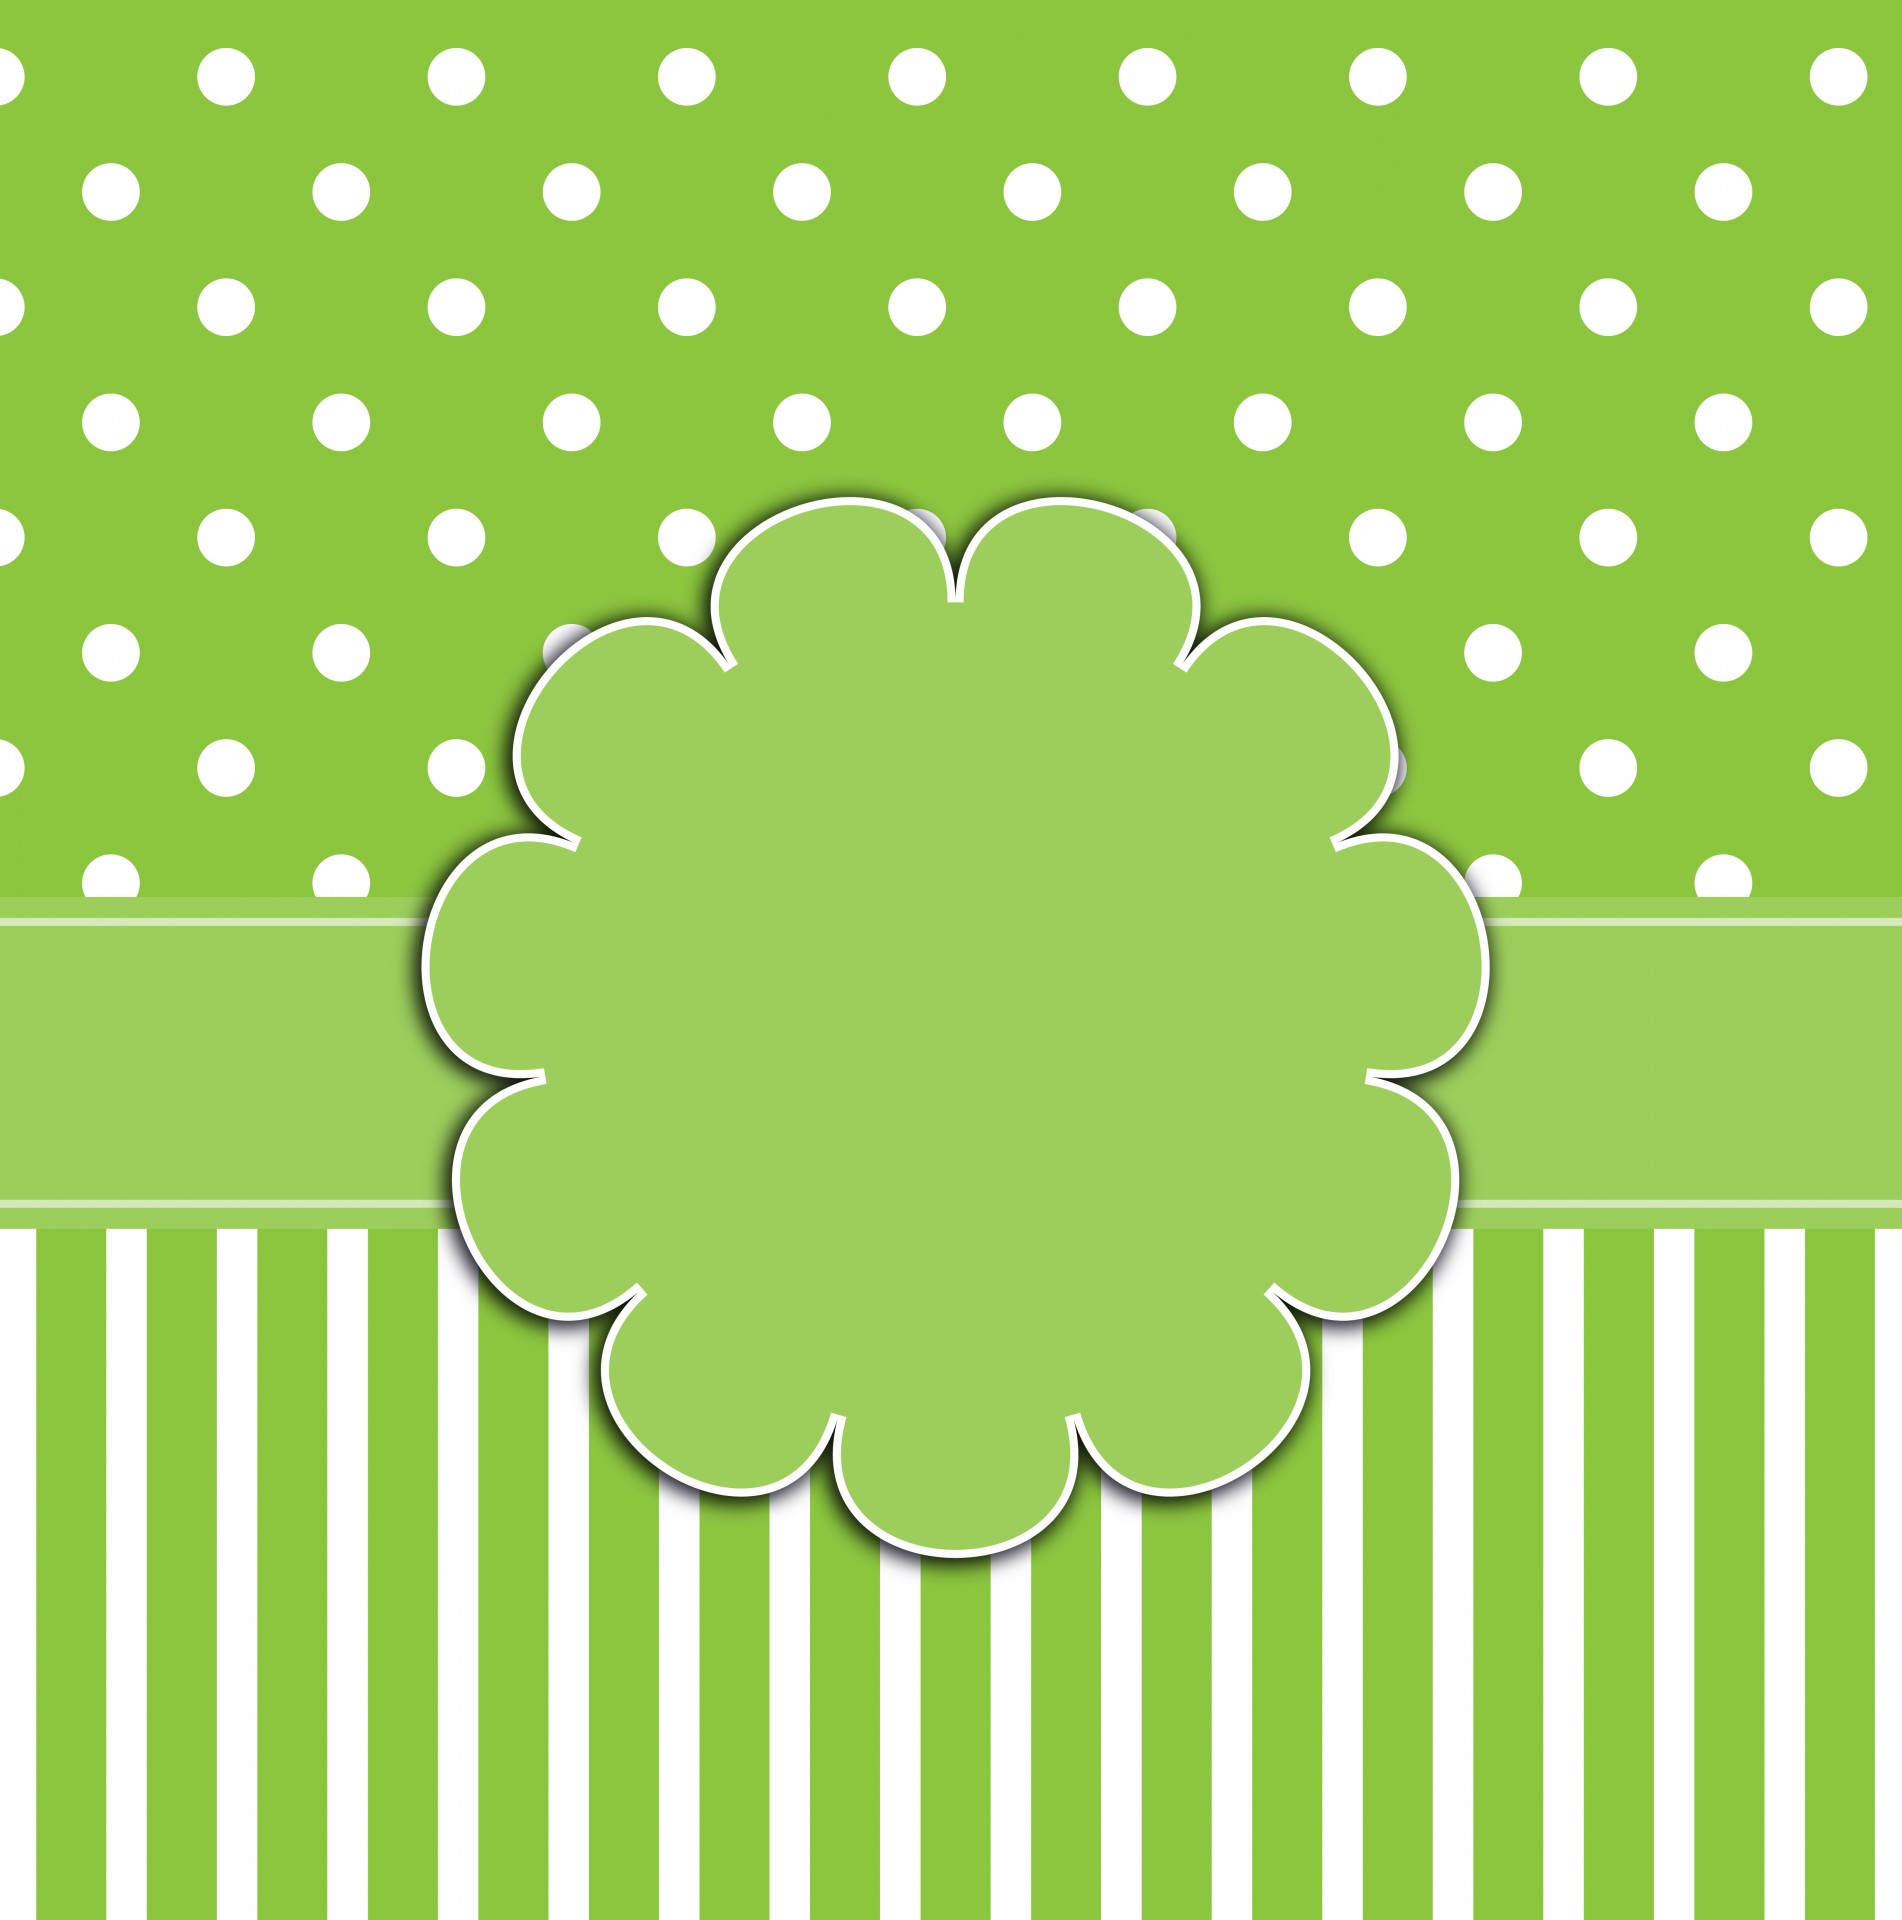 Beautiful polka dots and stripes in green and white card template for scrapbooking